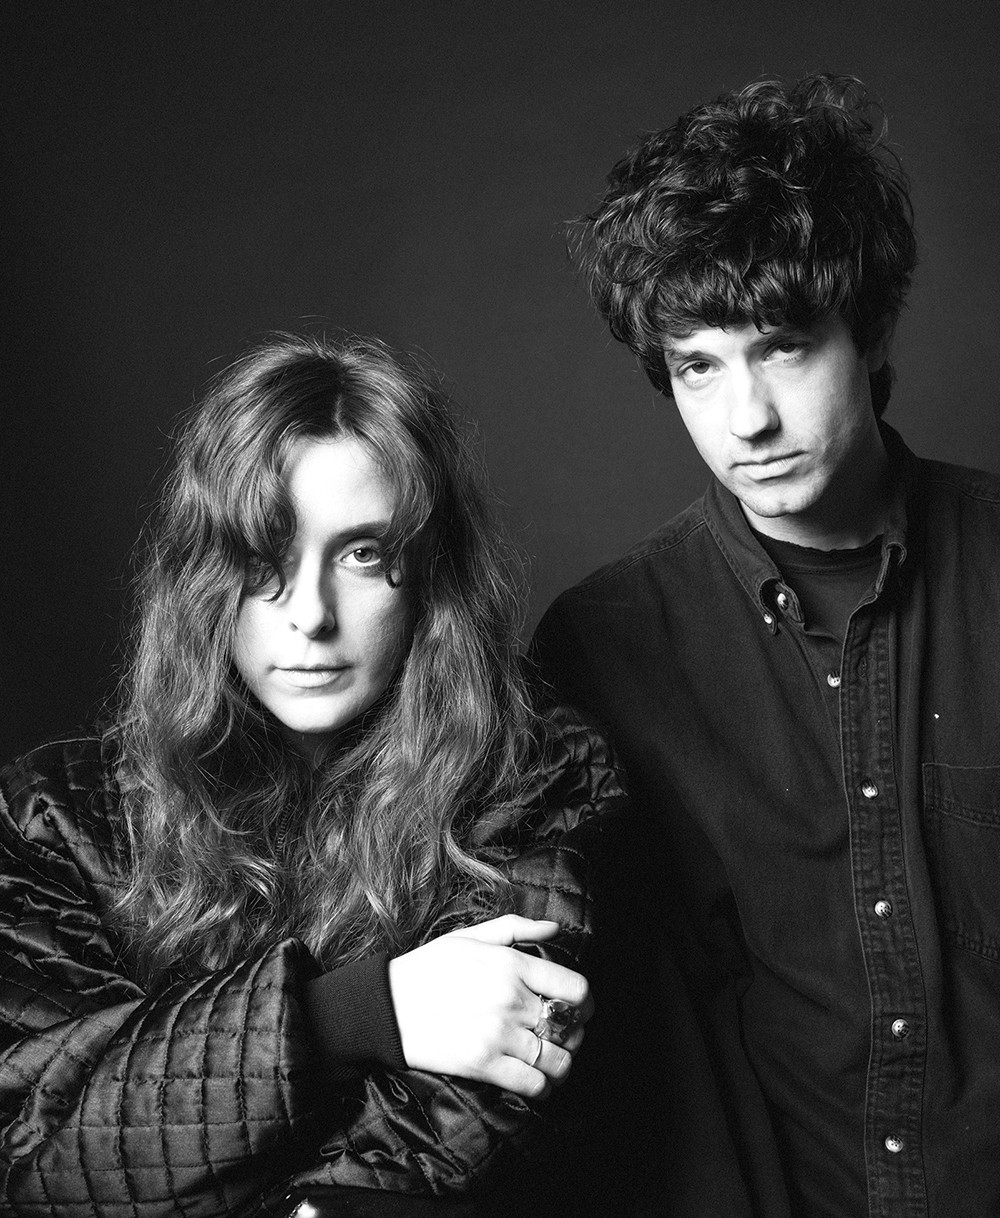 Catch Beach House at the Knit on Aug. 9